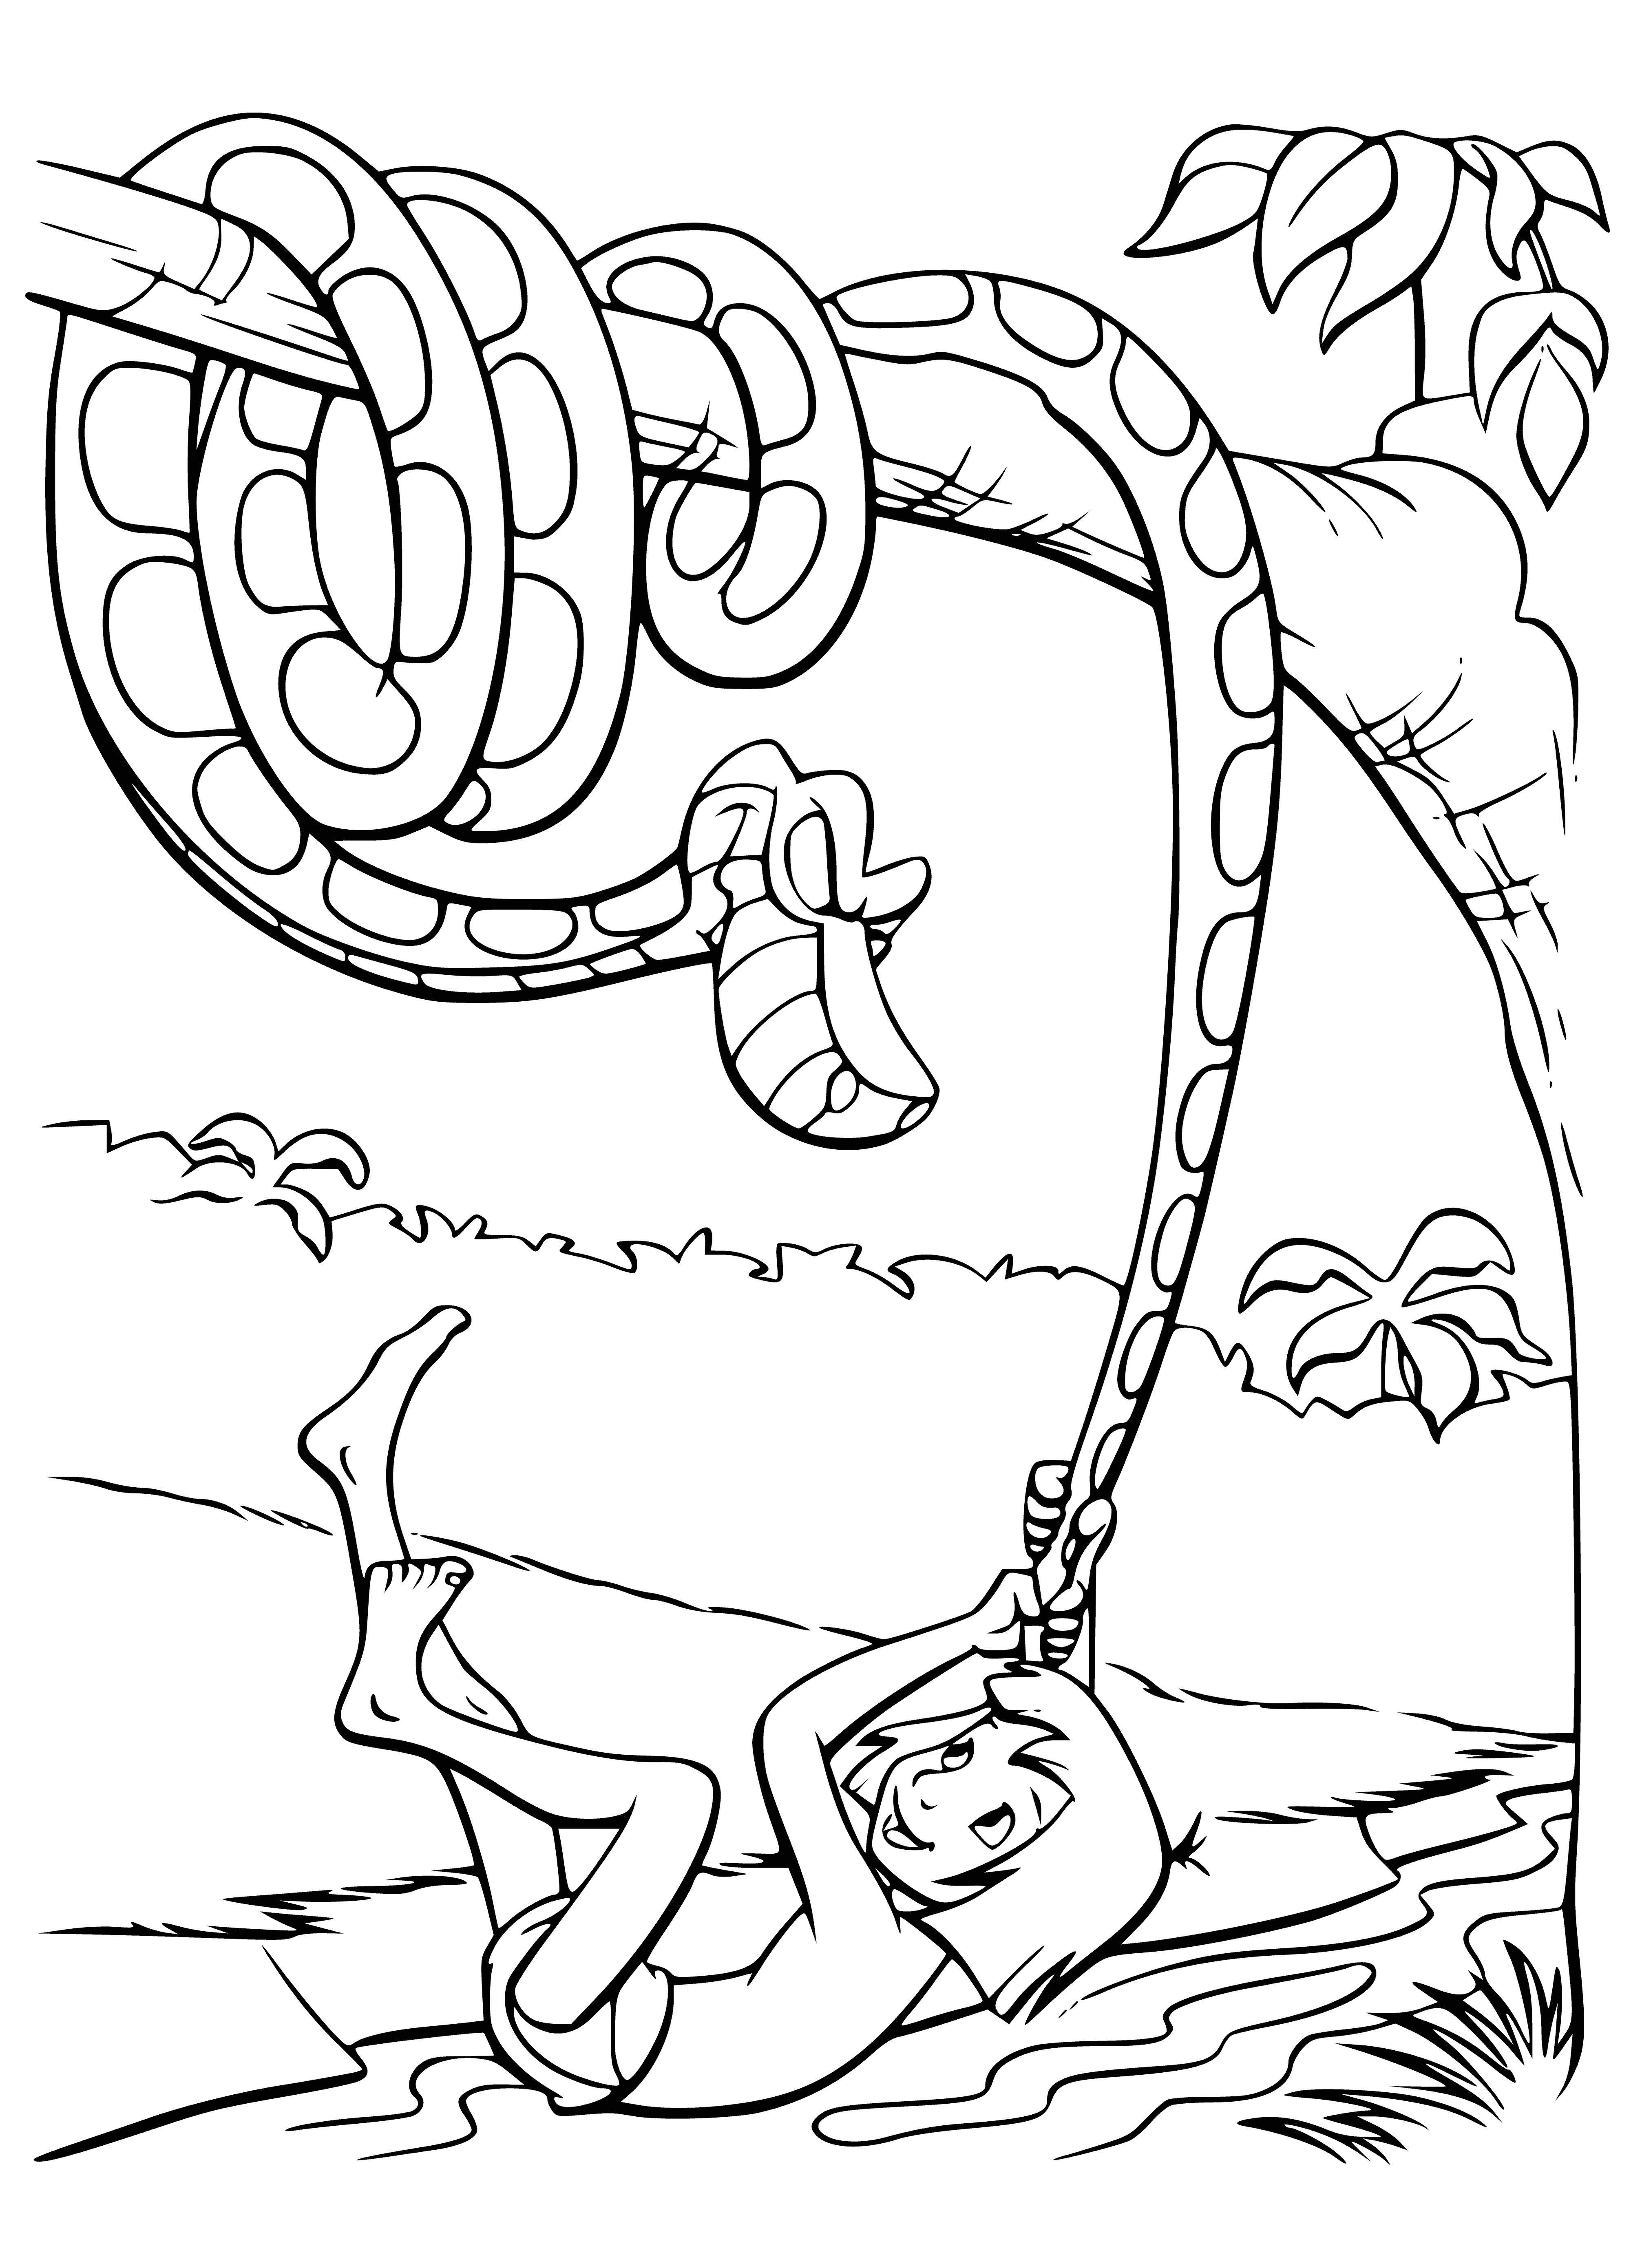 coloring page: Kaa and Mowgli face off: Kaa, a python coiled around a tree, eyes predatory; Mowgli, a small boy, afraid but fascinated, armed with a knife.